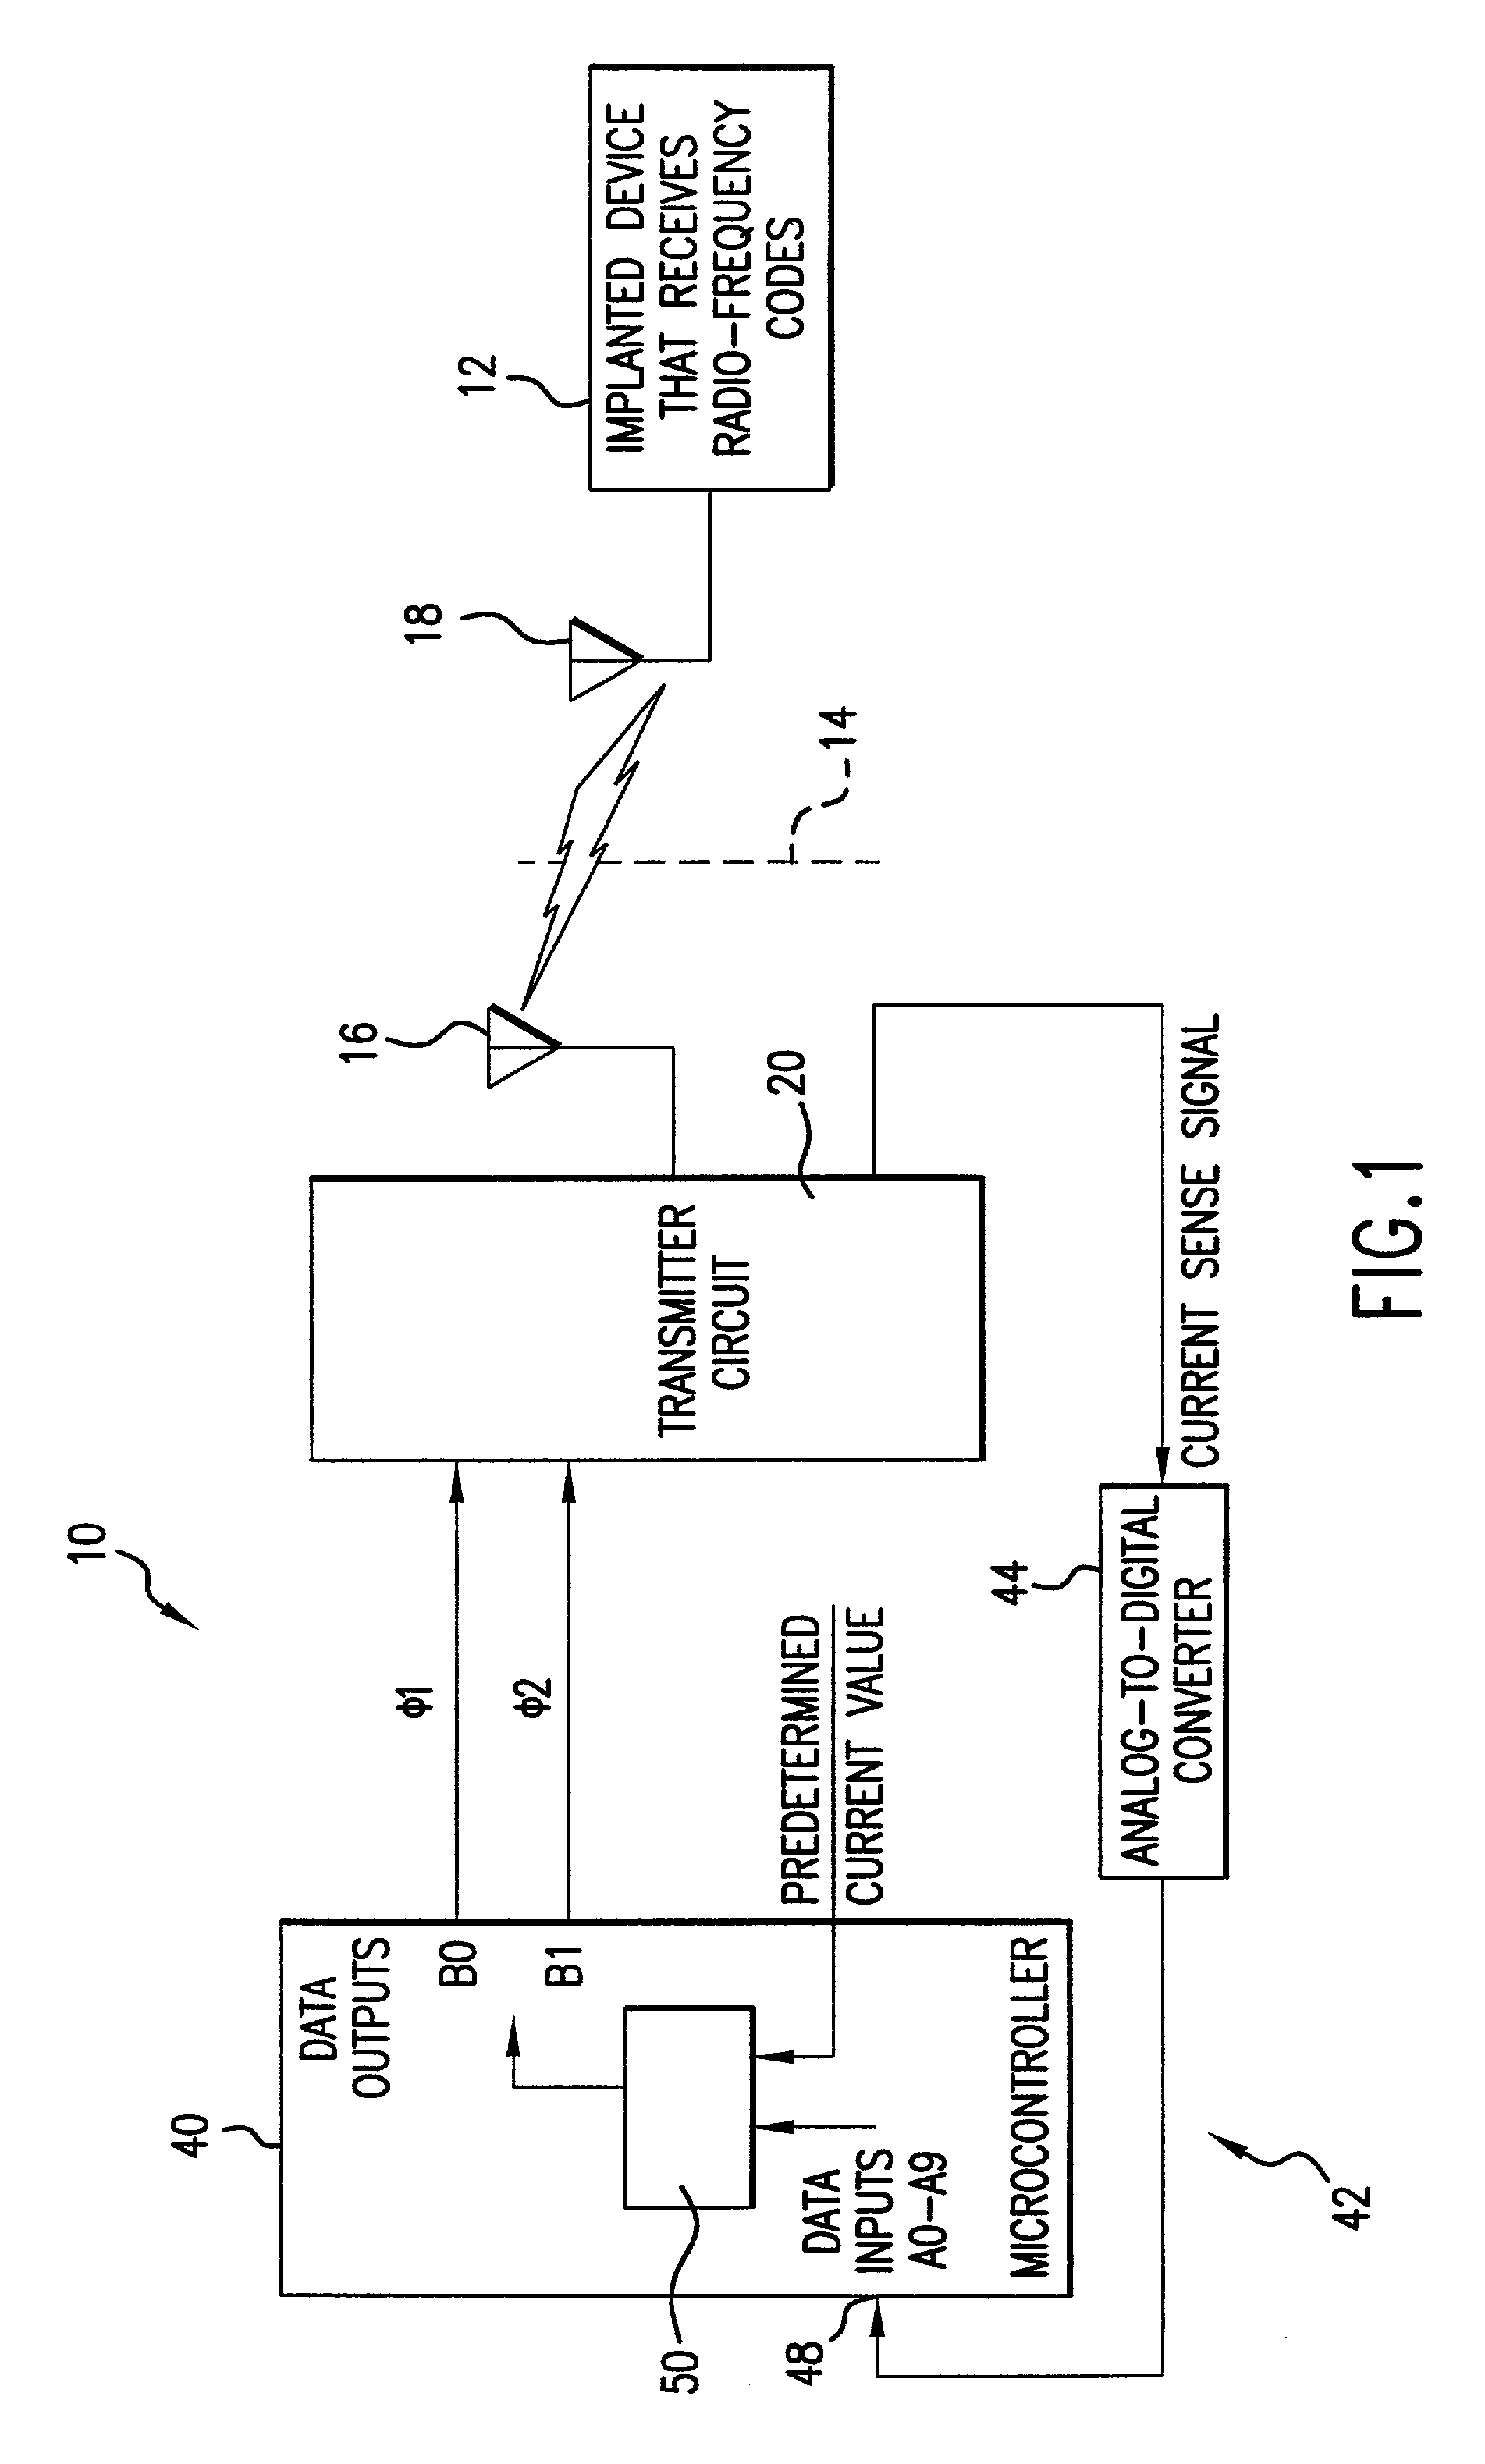 Transmitter system for wireless communication with implanted devices